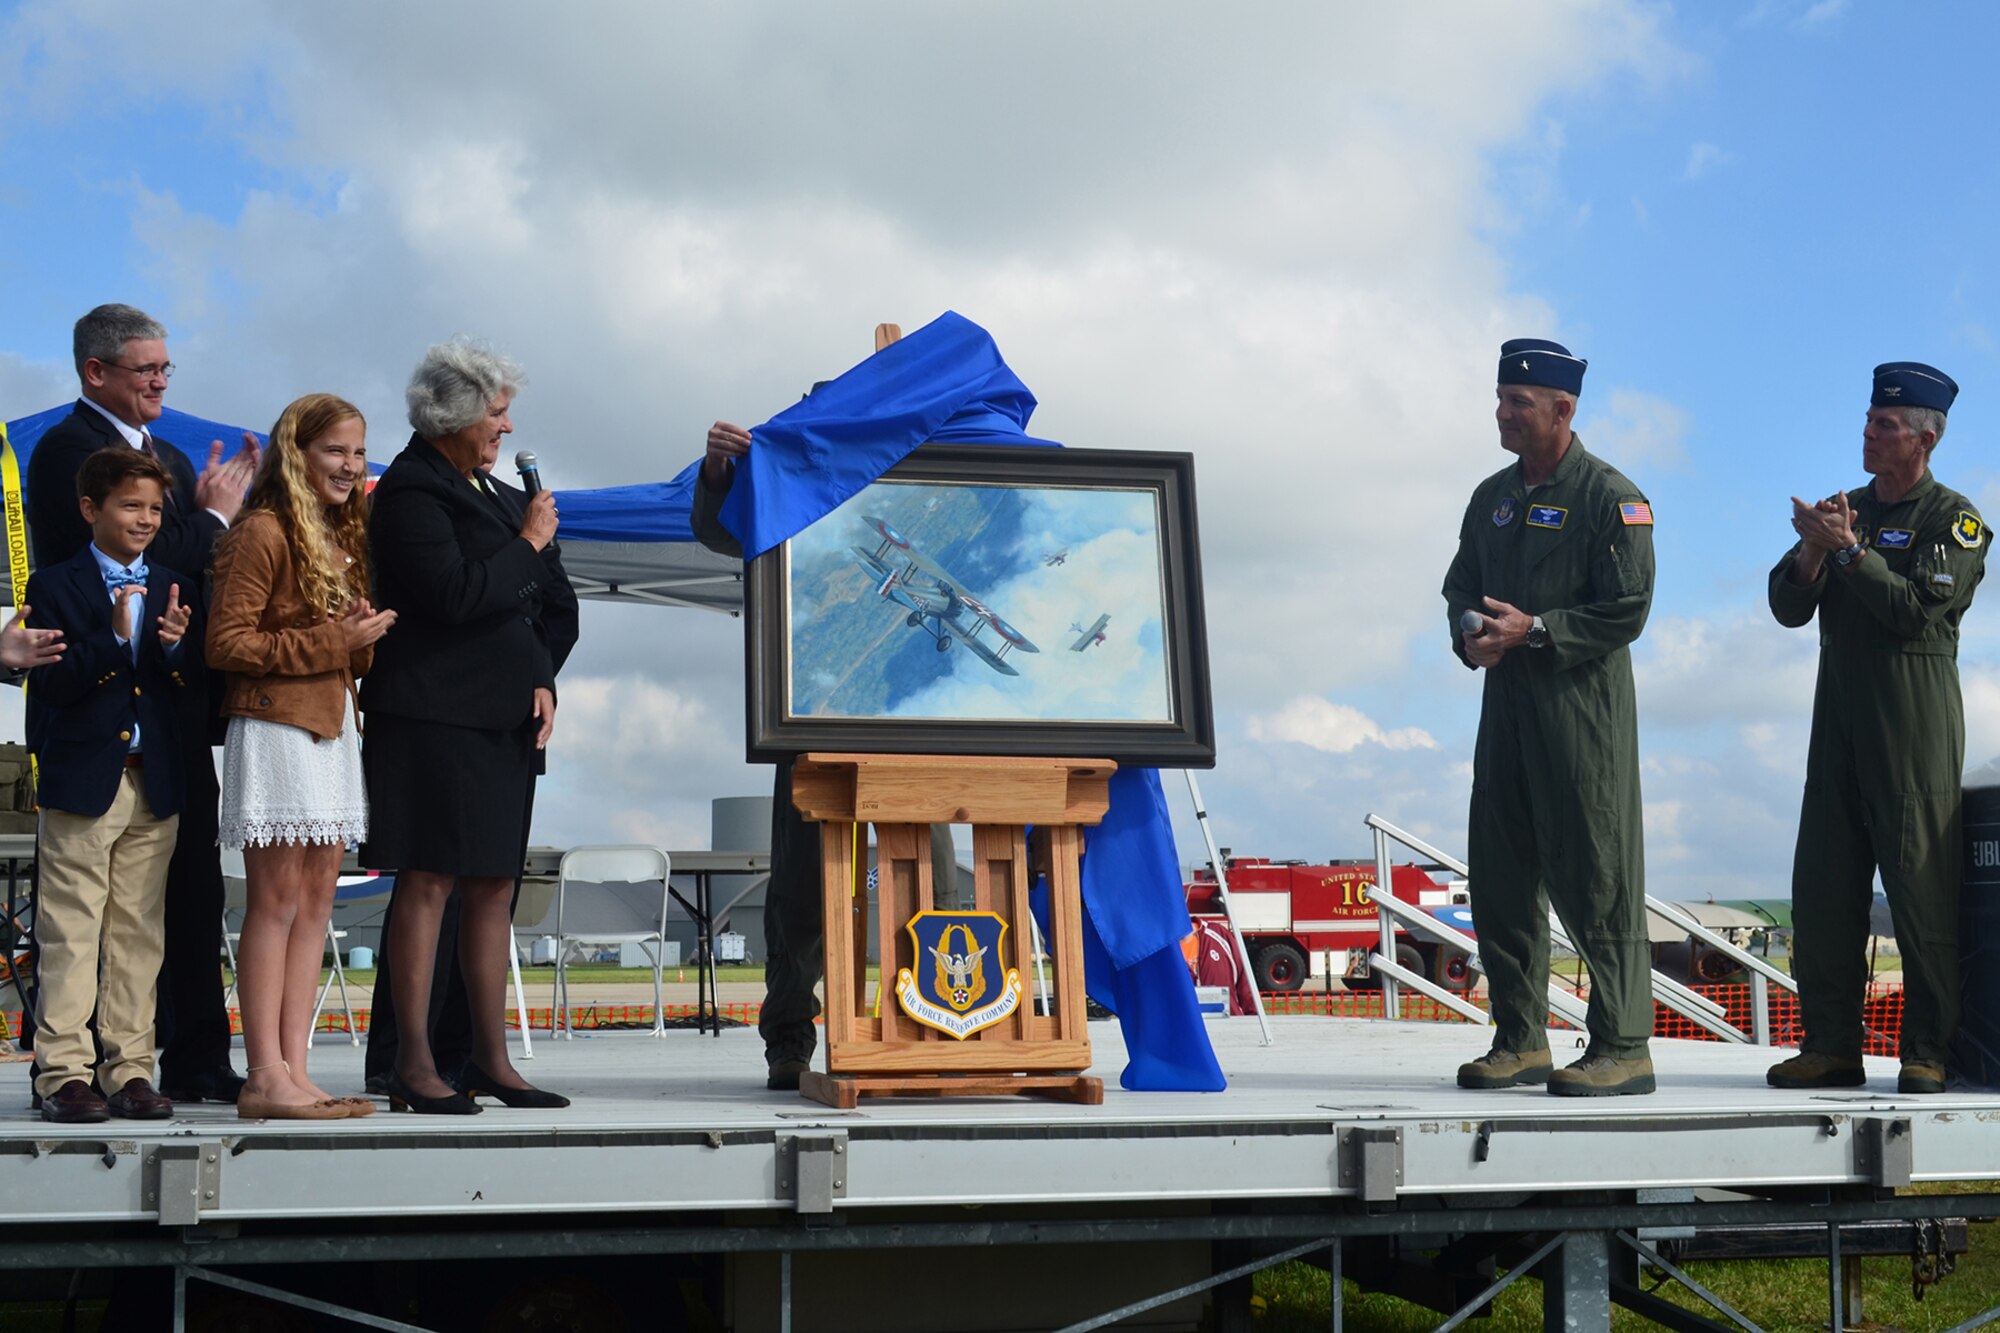 Susan Mozena speaks prior to the unveiling of a painting depicting former Reservist First Lieutenant Charles d'Olive, 93rd Pursuit Squadron, in the cockpit of his French-built Spad XIII pursuit aircraft engaging five German aircraft during World War I, Wright Field, Dayton Ohio, Oct. 1, 2016. The Mozena family were onstage during the unveiling. (U.S. Air Force Tech. Sgt. Pam Ives/Released)